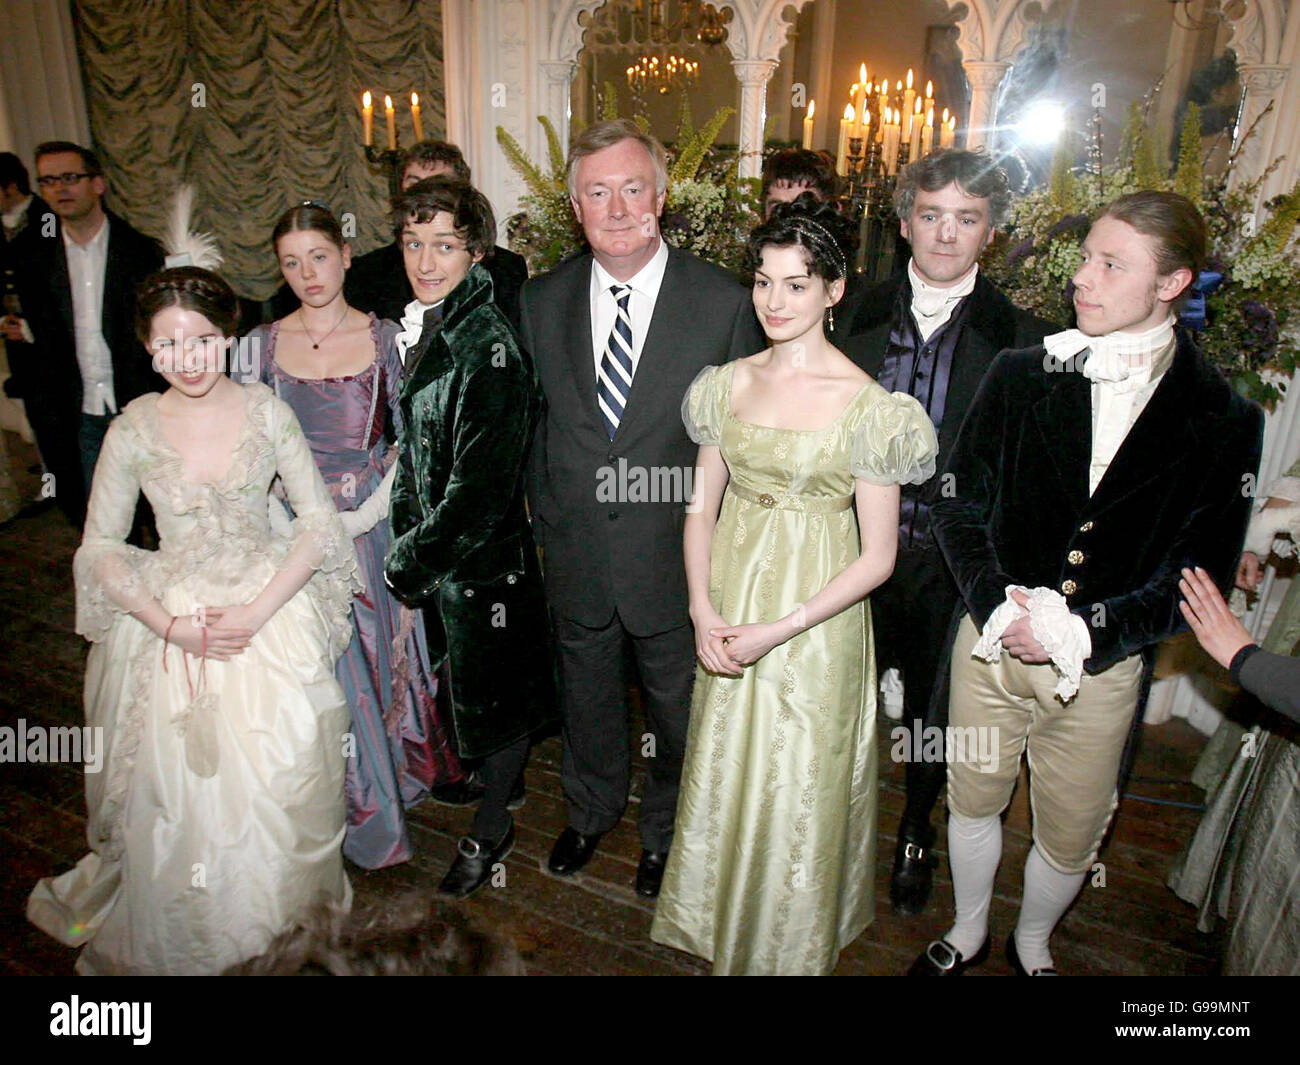 Irish Arts Minister John O'Donoghue (centre) took a step back in time as he visited the Co Offaly set of Becoming Jane, starring Anne Hathaway and James McEvoy, where 100 extras in period costume dress gathered to film the ballroom scene. Stock Photo